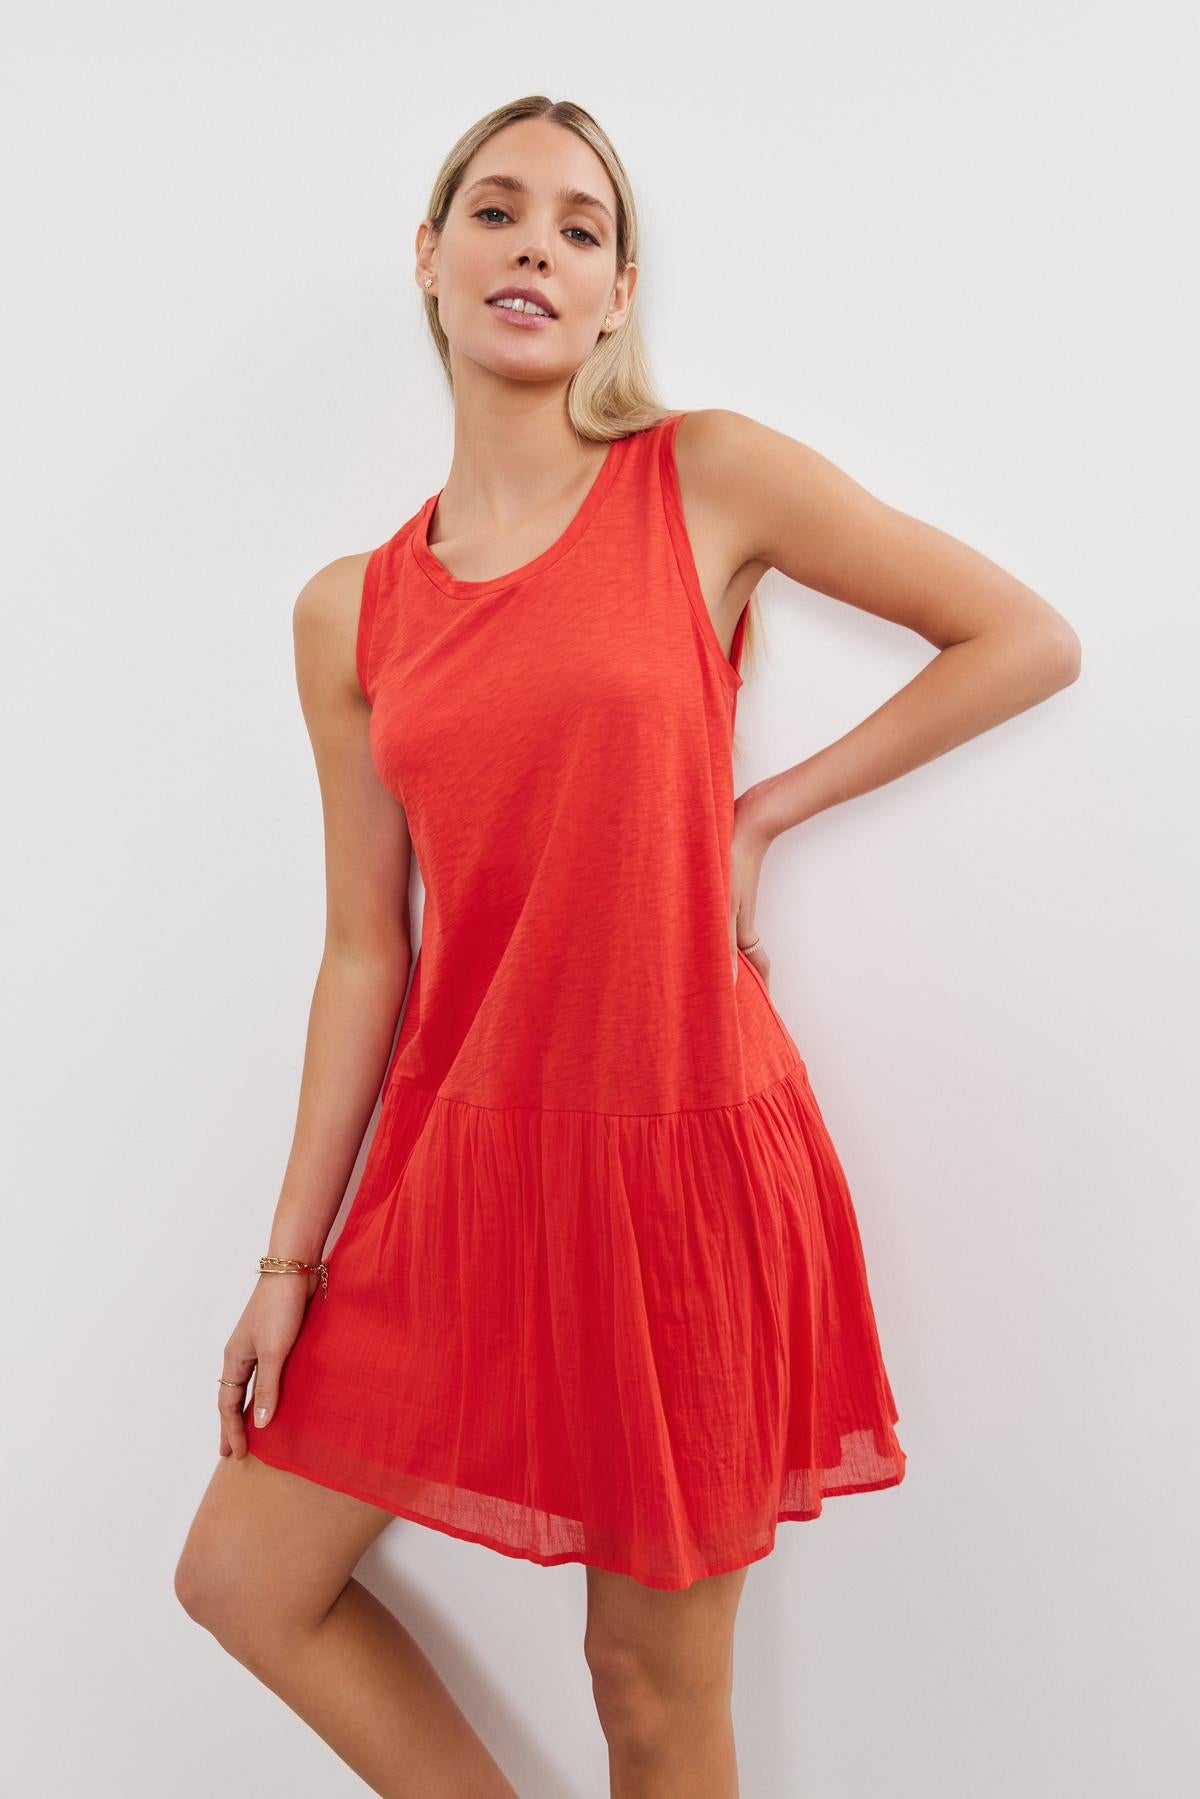 A young woman stands against a white background, wearing a casual sleeveless red MINA DRESS with a tiered skirt from Velvet by Graham & Spencer, and looking to the side with her hand on her hip.-36910021542081